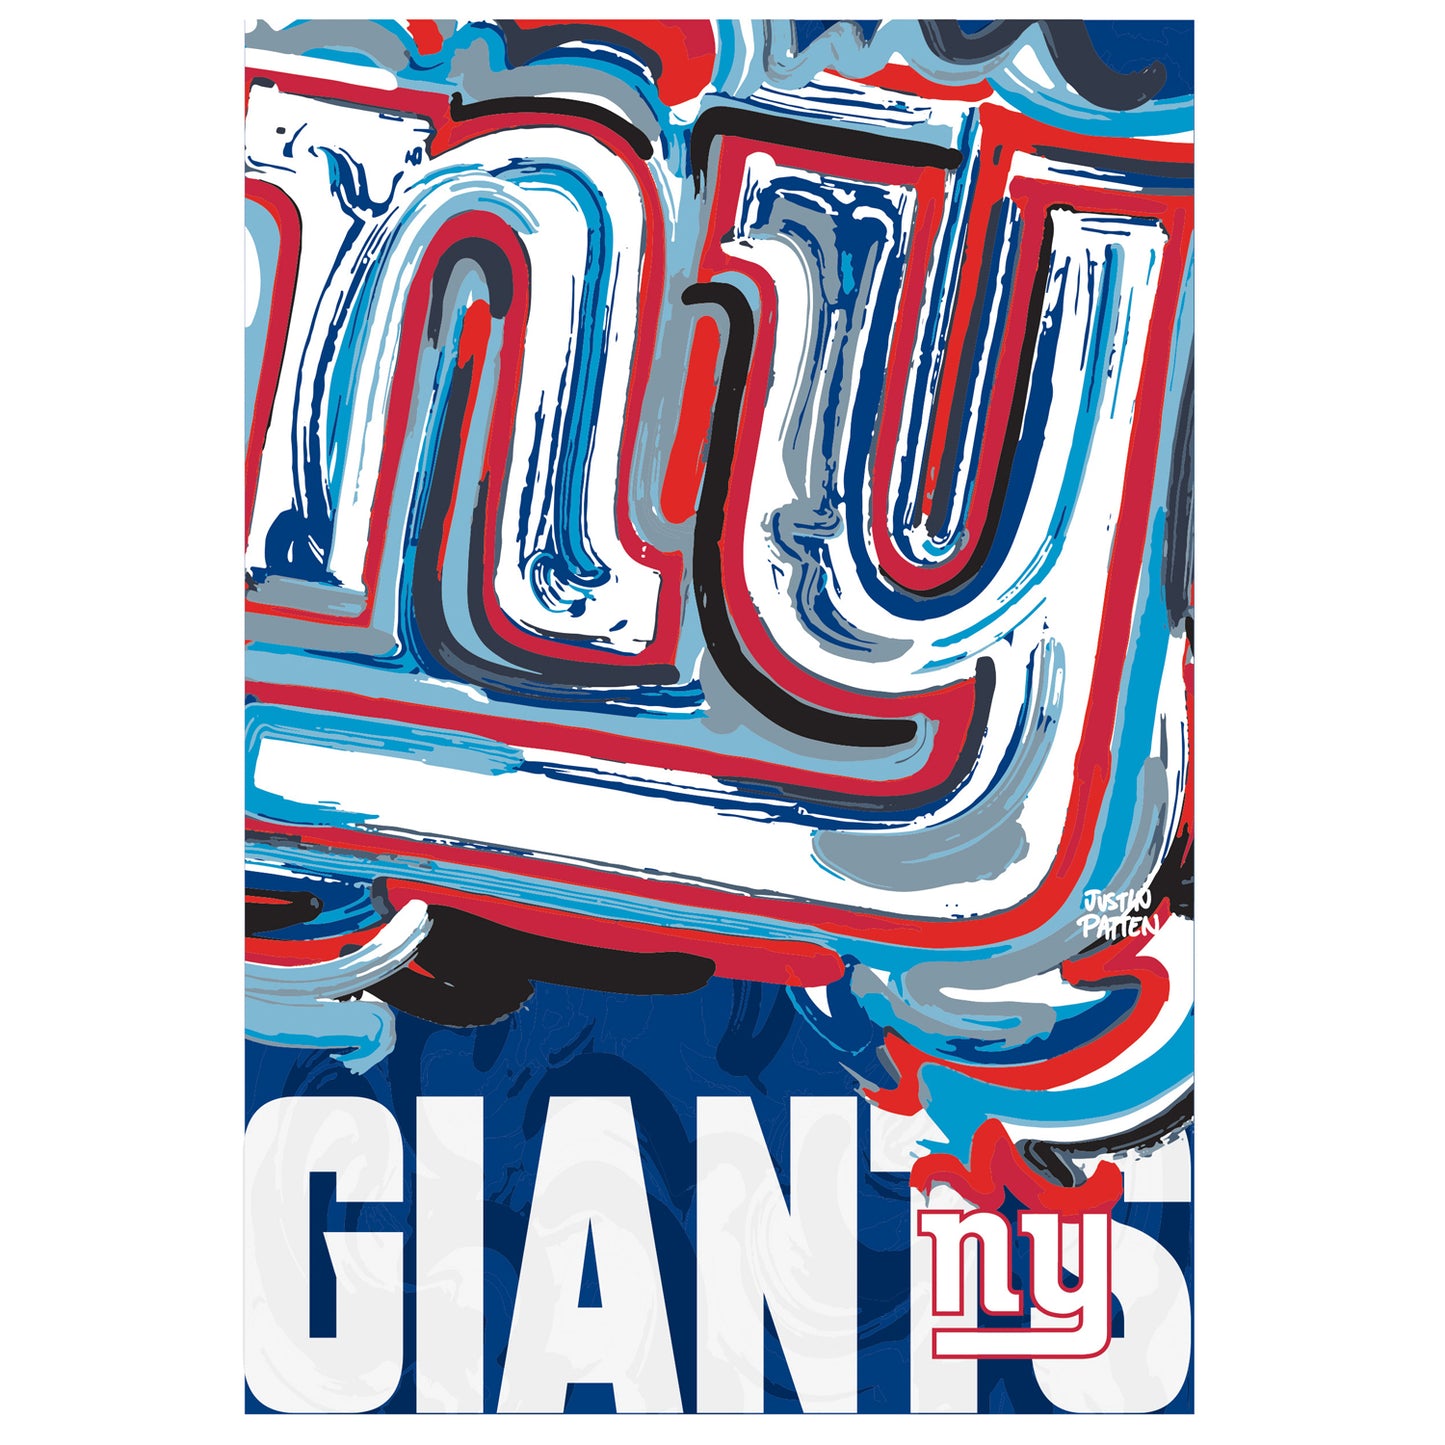 New York Giants House Flag 29" x 43" by Justin Patten